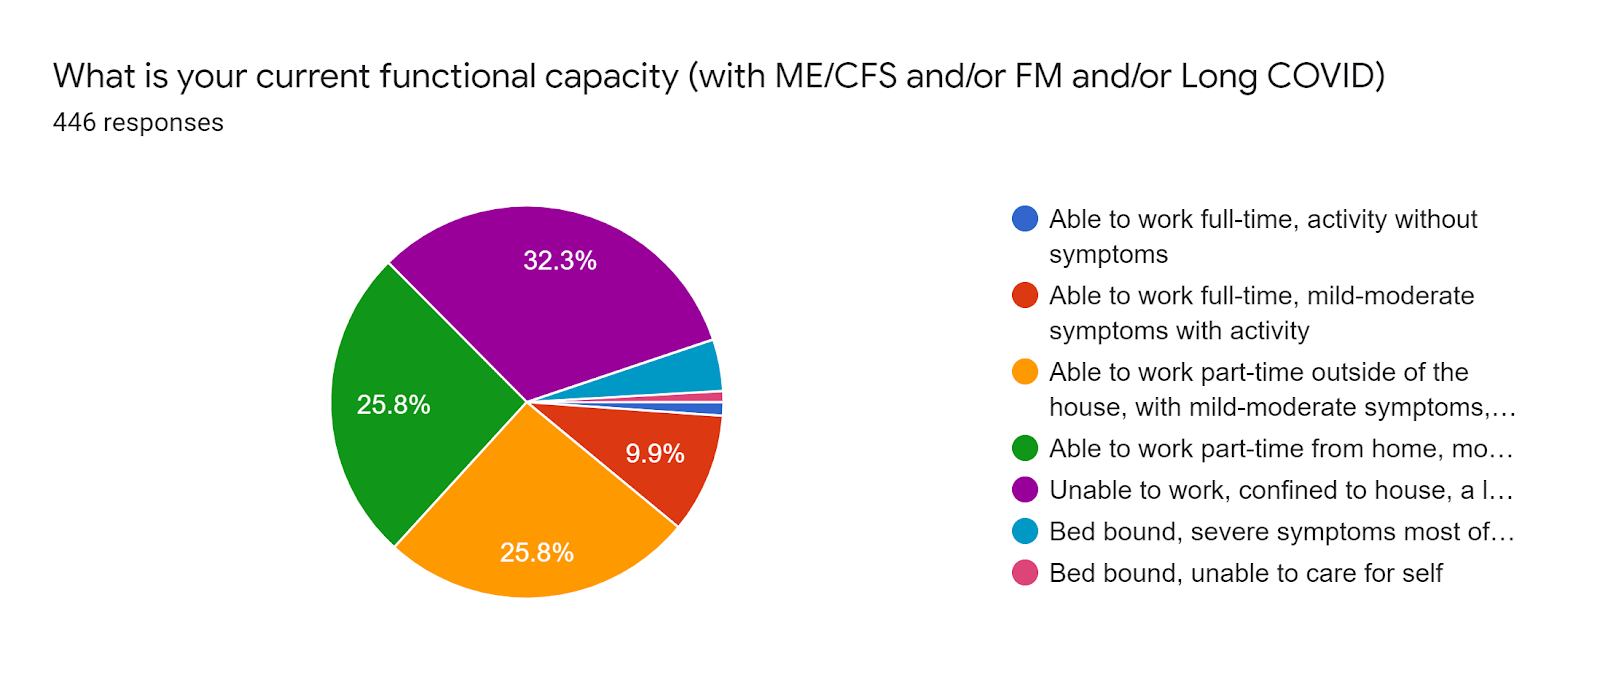 Forms response chart. Question title: What is your current functional capacity (with ME/CFS and/or FM and/or Long COVID). Number of responses: 446 responses.